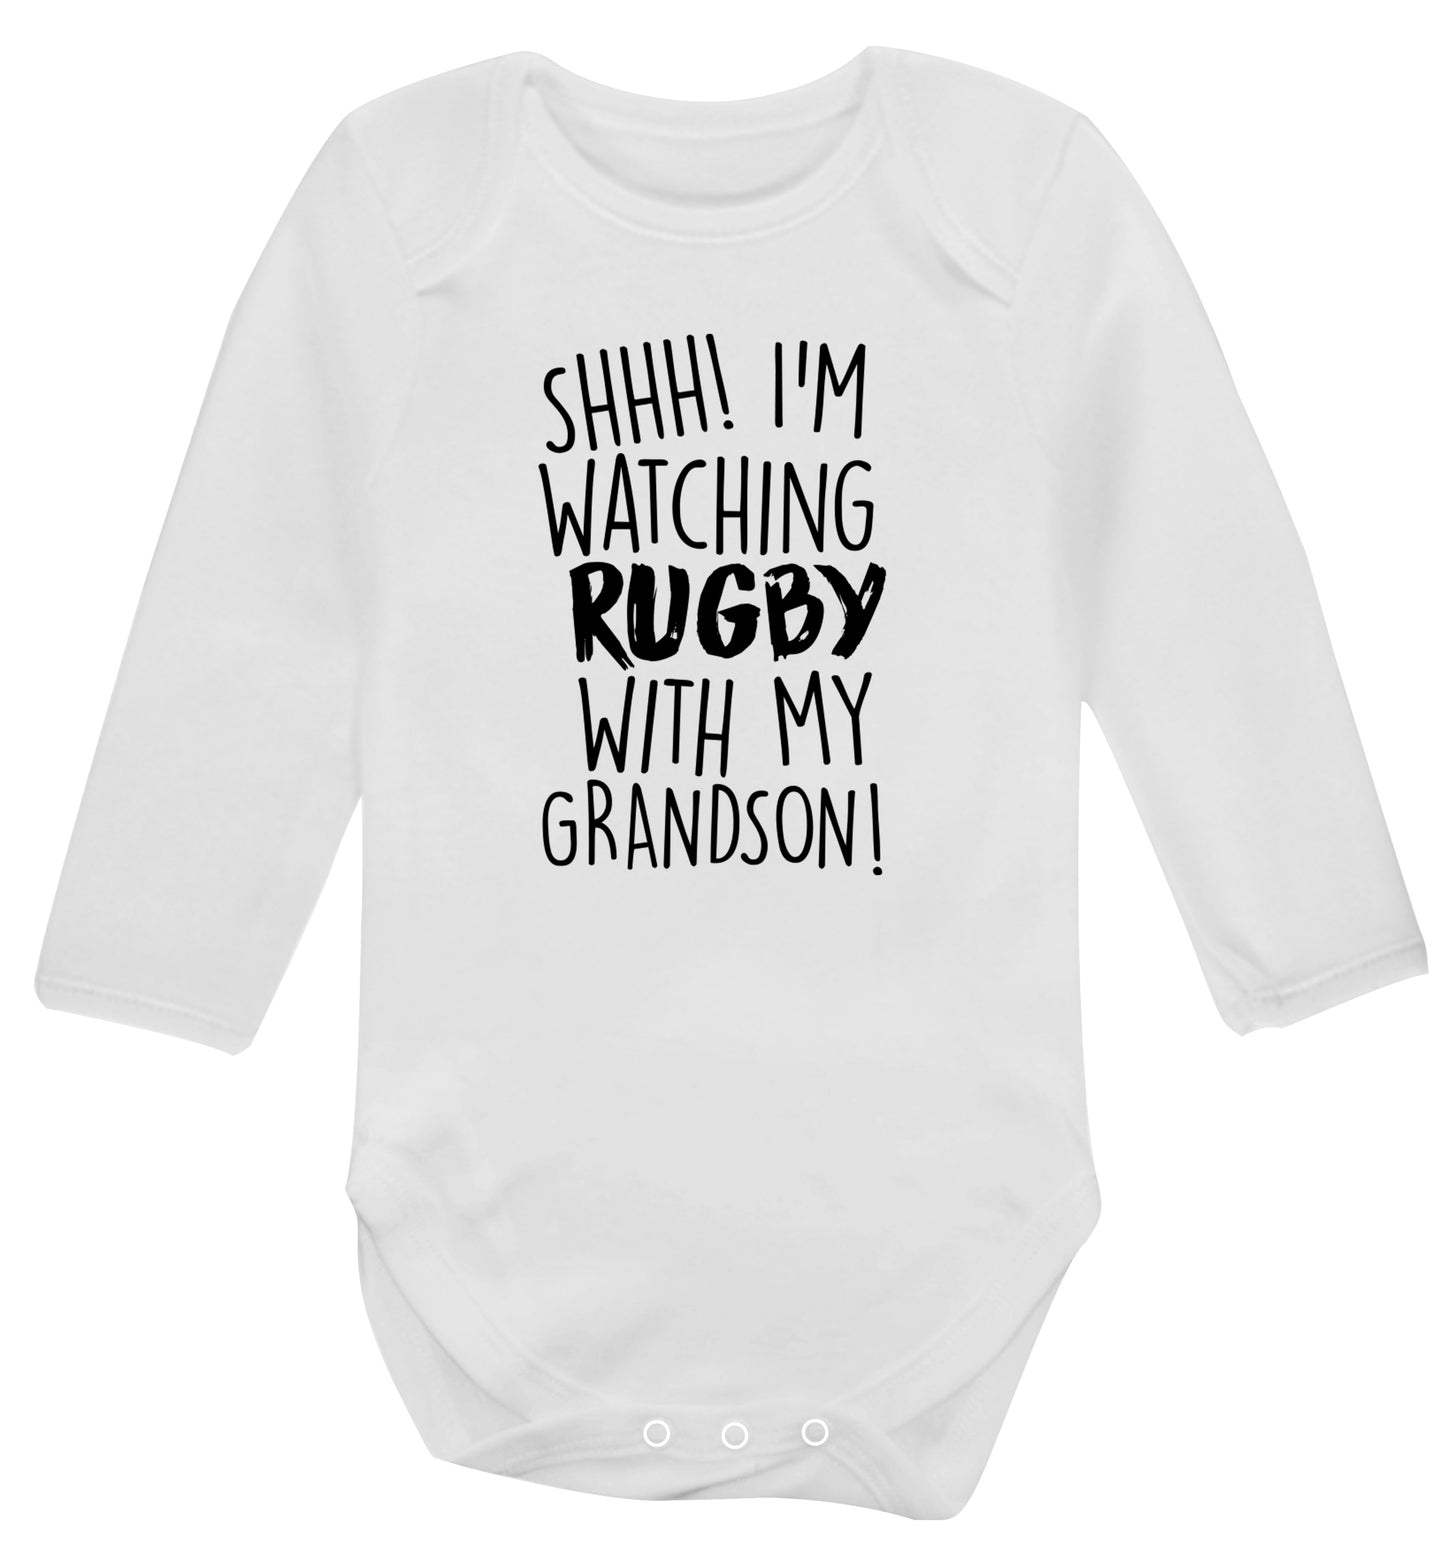 Shh I'm watching rugby with my grandson Baby Vest long sleeved white 6-12 months